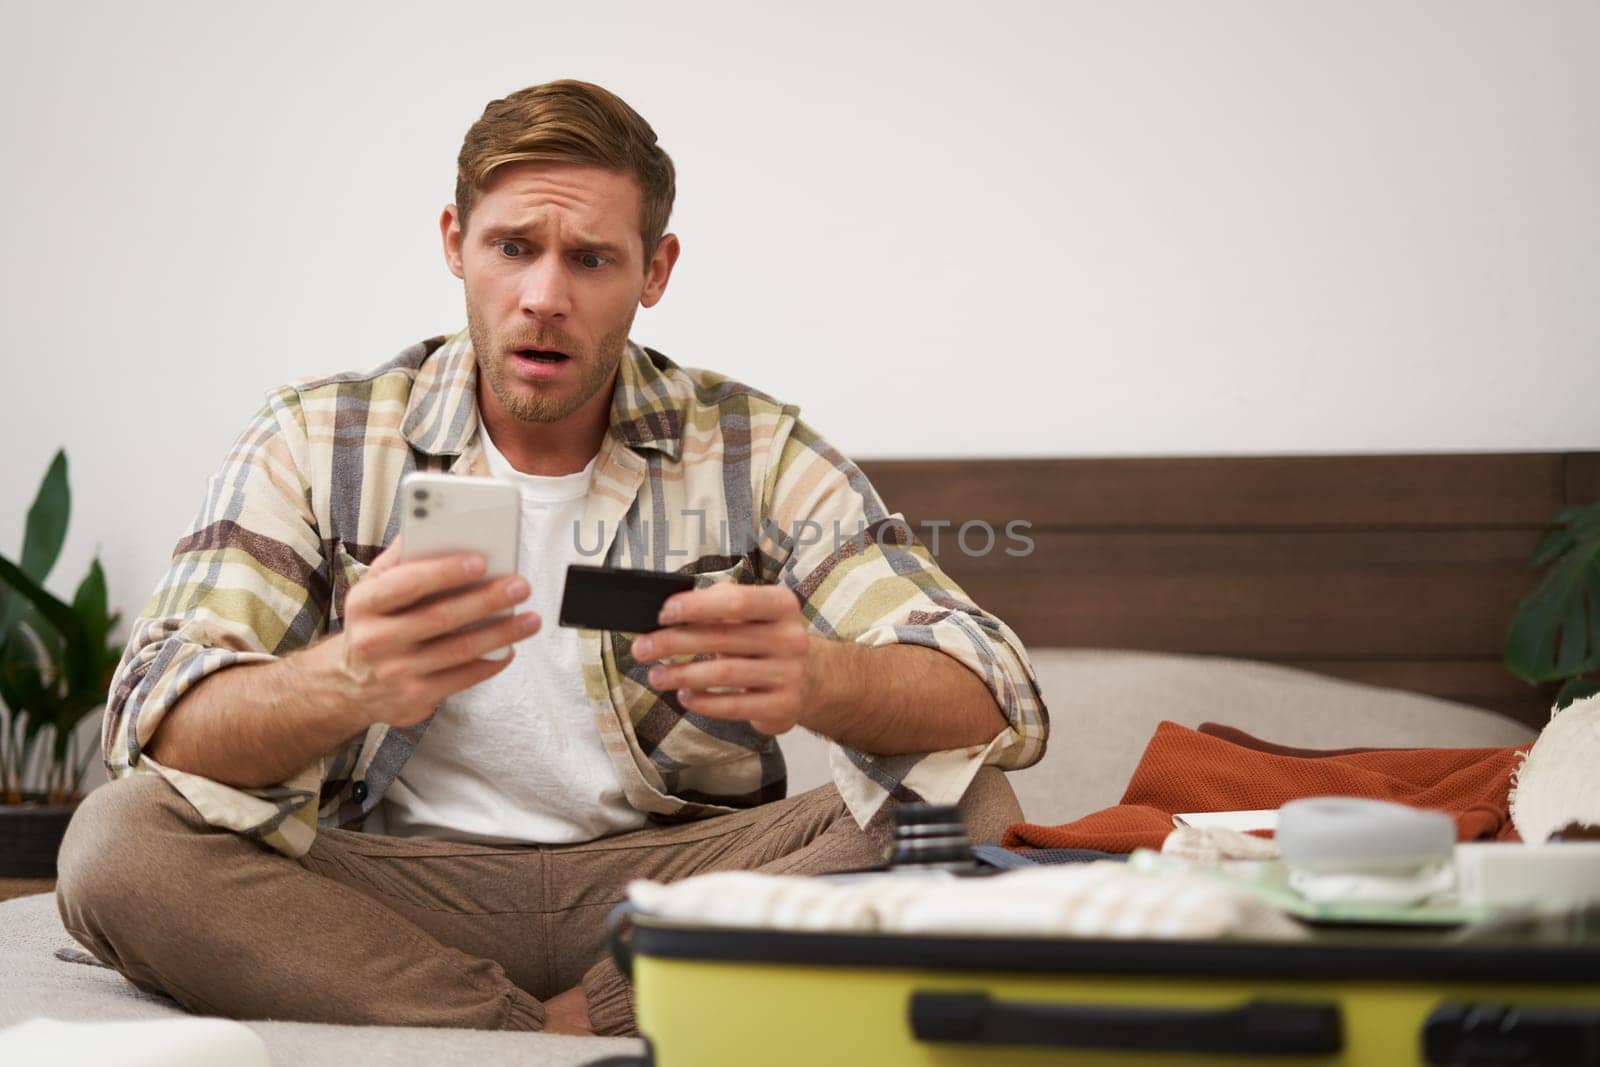 Portrait of worried young man, sitting on bed with suitcase, holding credit card and mobile phone, looking concerned at smartphone screen while packing for holiday. Transactions and finance concept